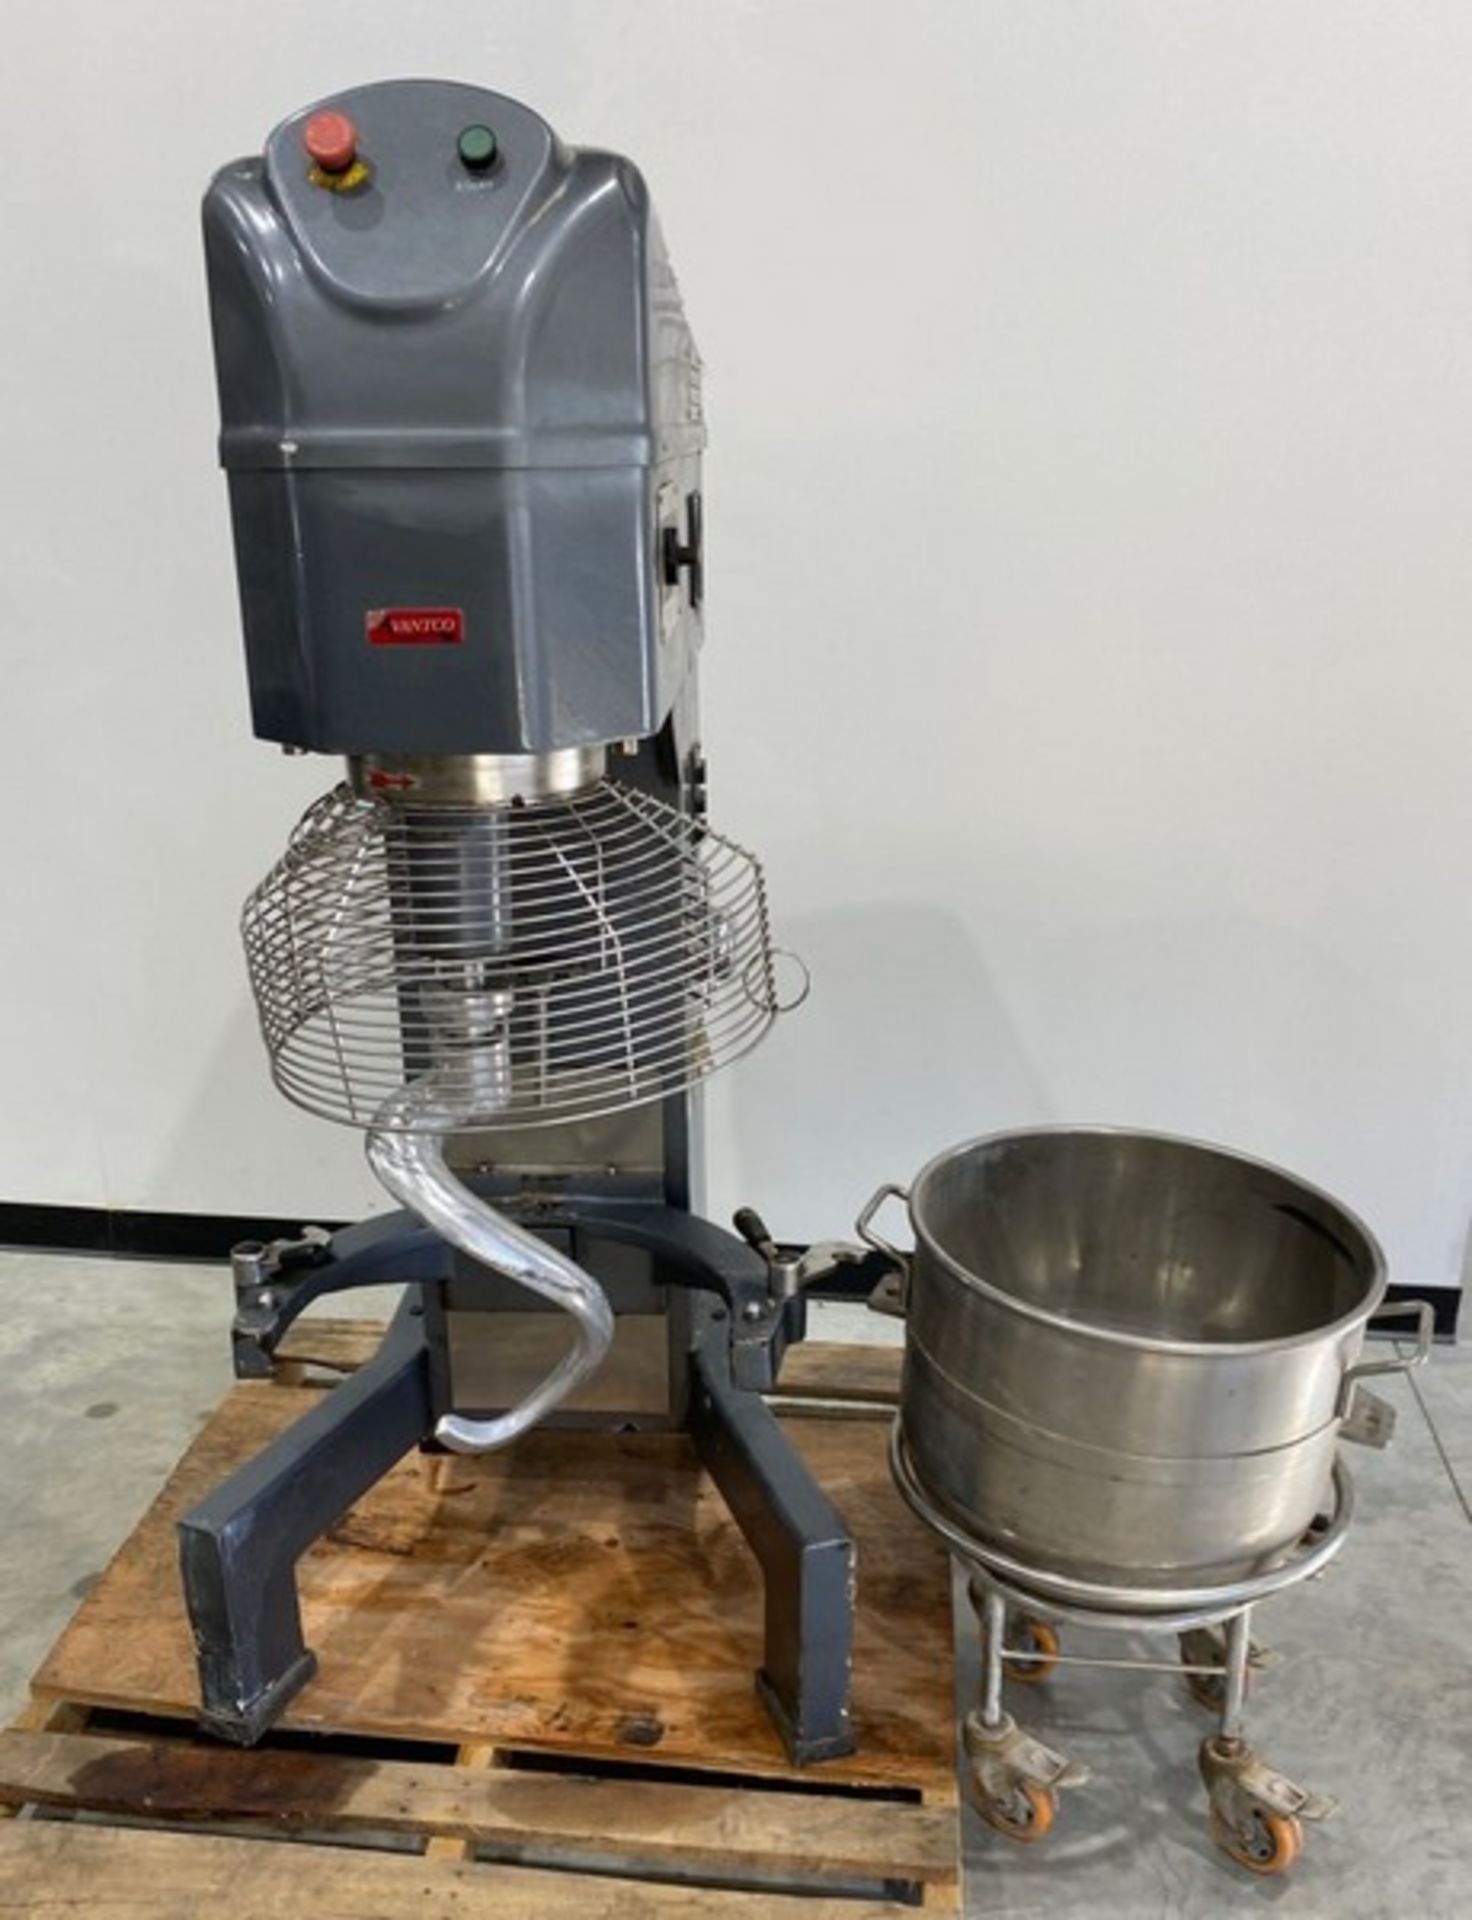 Avantco MX60 Mixer. Serial: 03 0021 16, 60Qt capacity. 240 Volts, 3 Phase, 60 Hz. Bowl is stainless